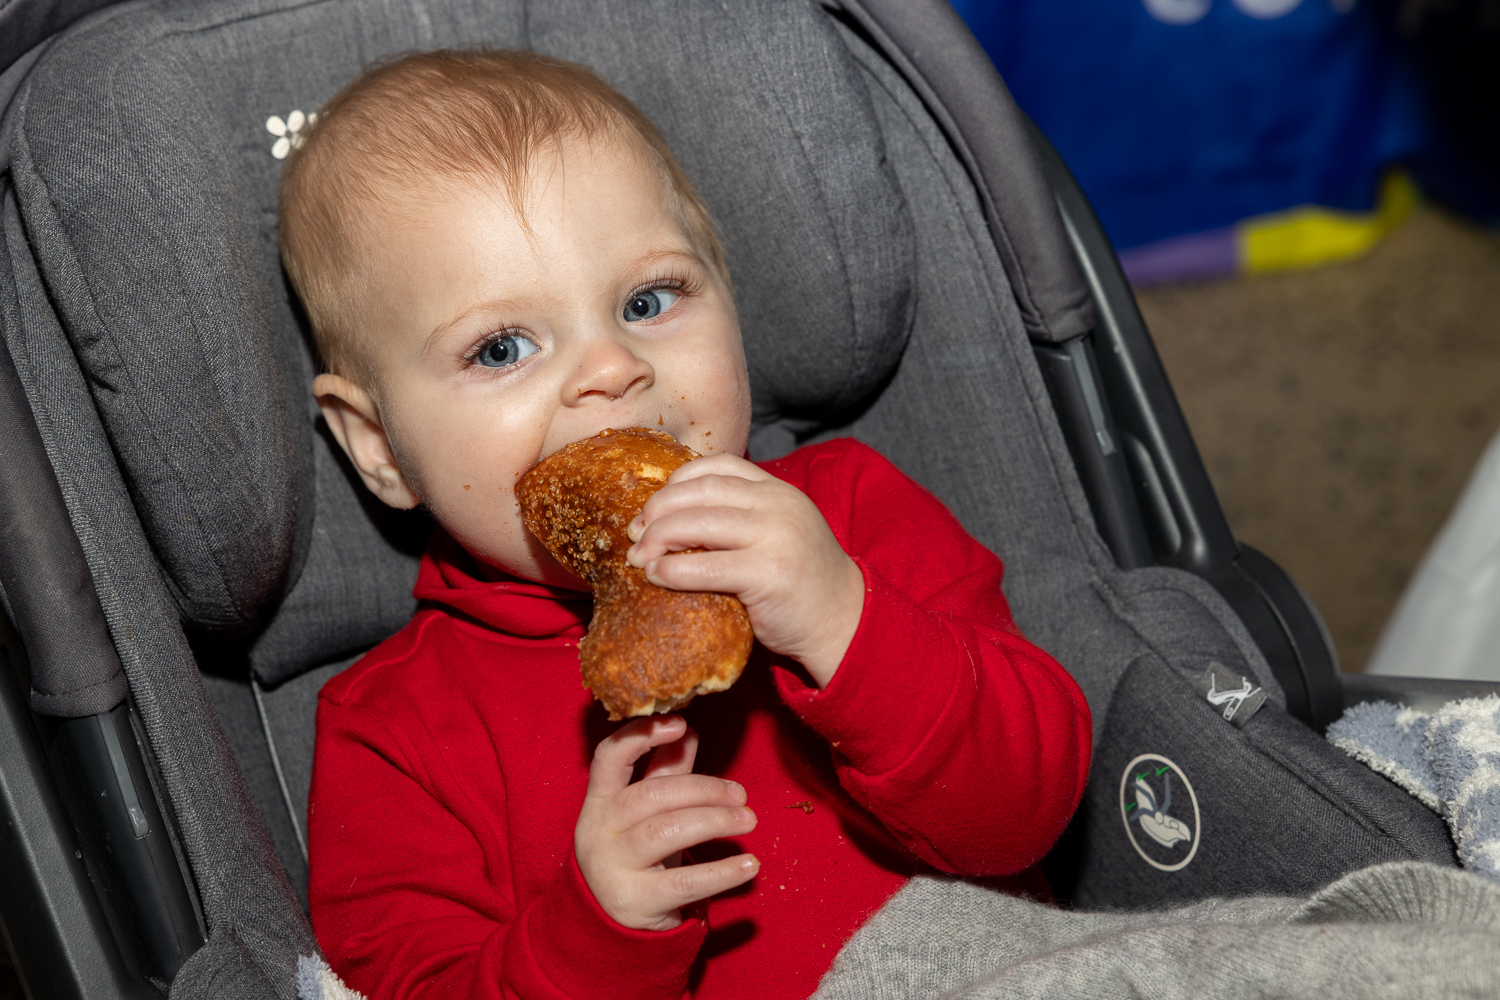 A baby named Madison in a red hoodie eating a bagel in a gray car seat.